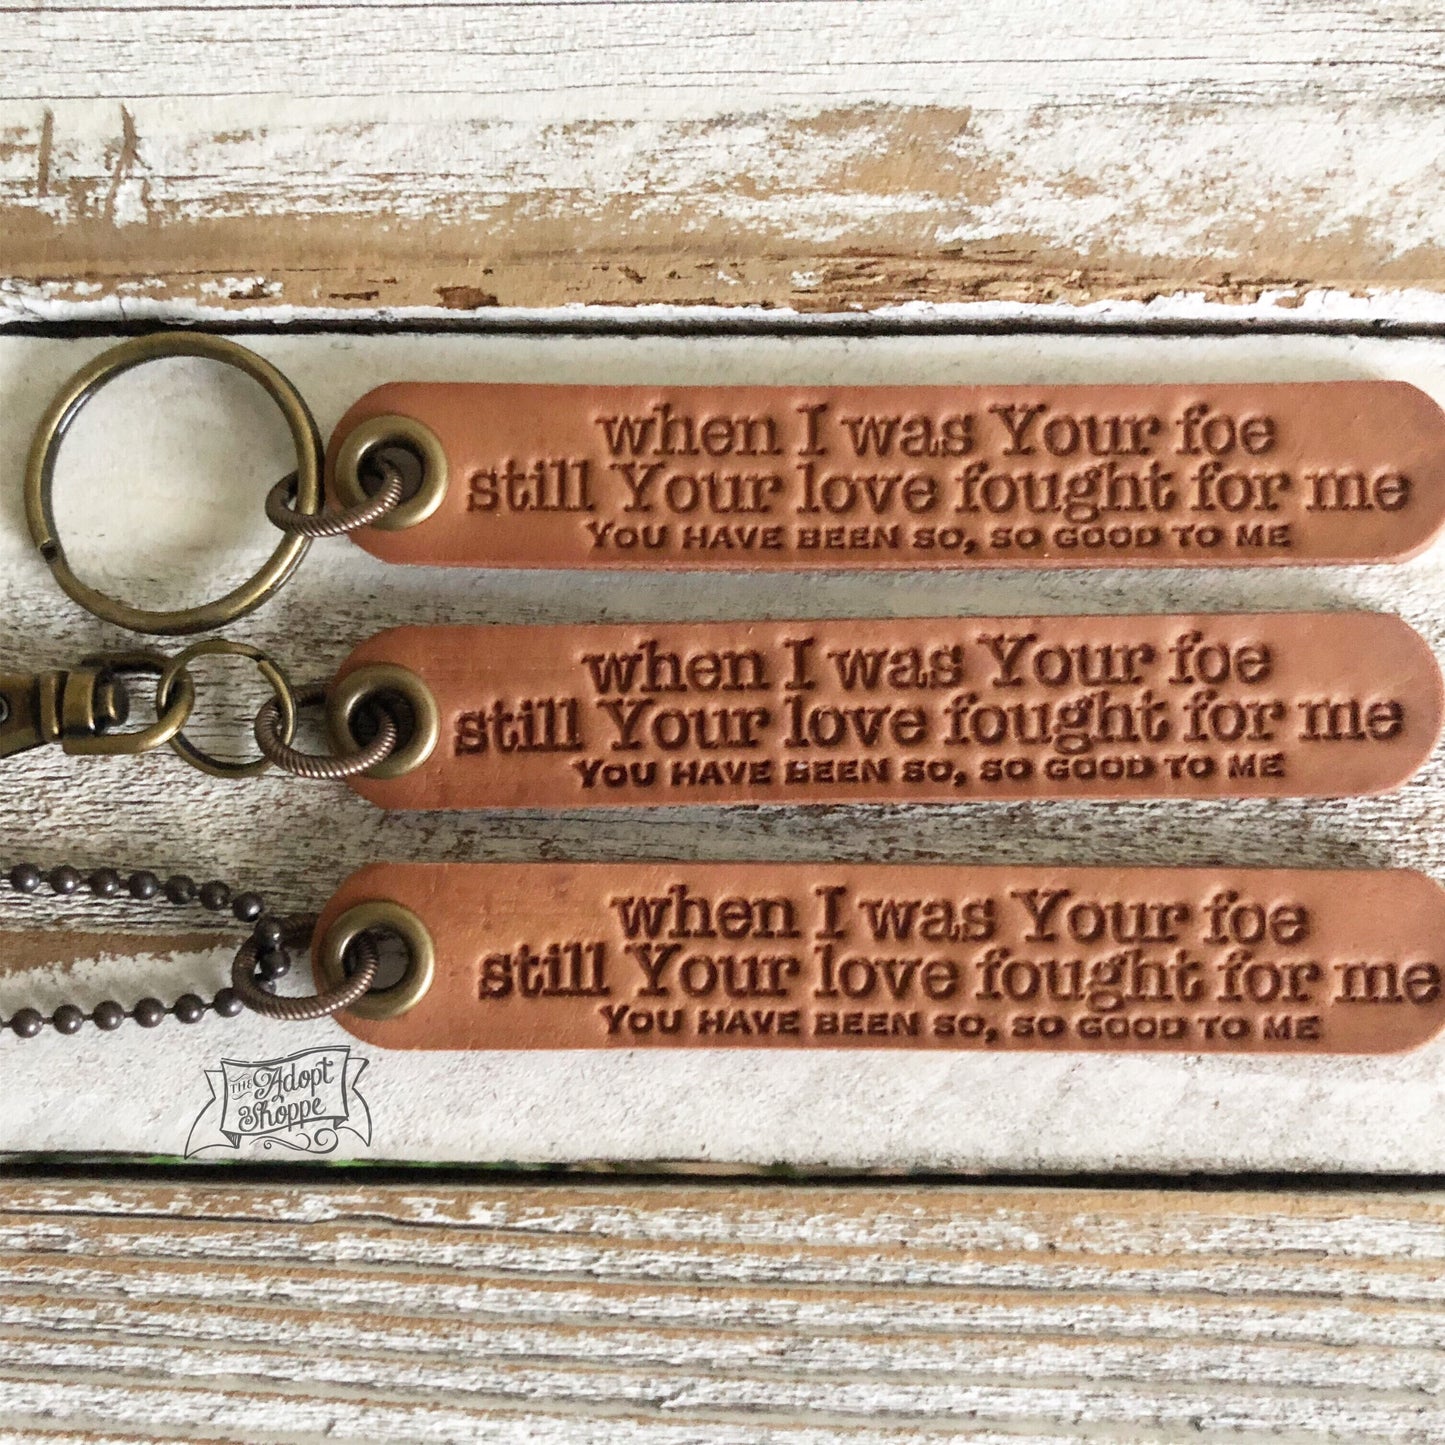 when I was Your foe still Your love fought for me (camel/natural) Cory Asbury reckless love leather tag